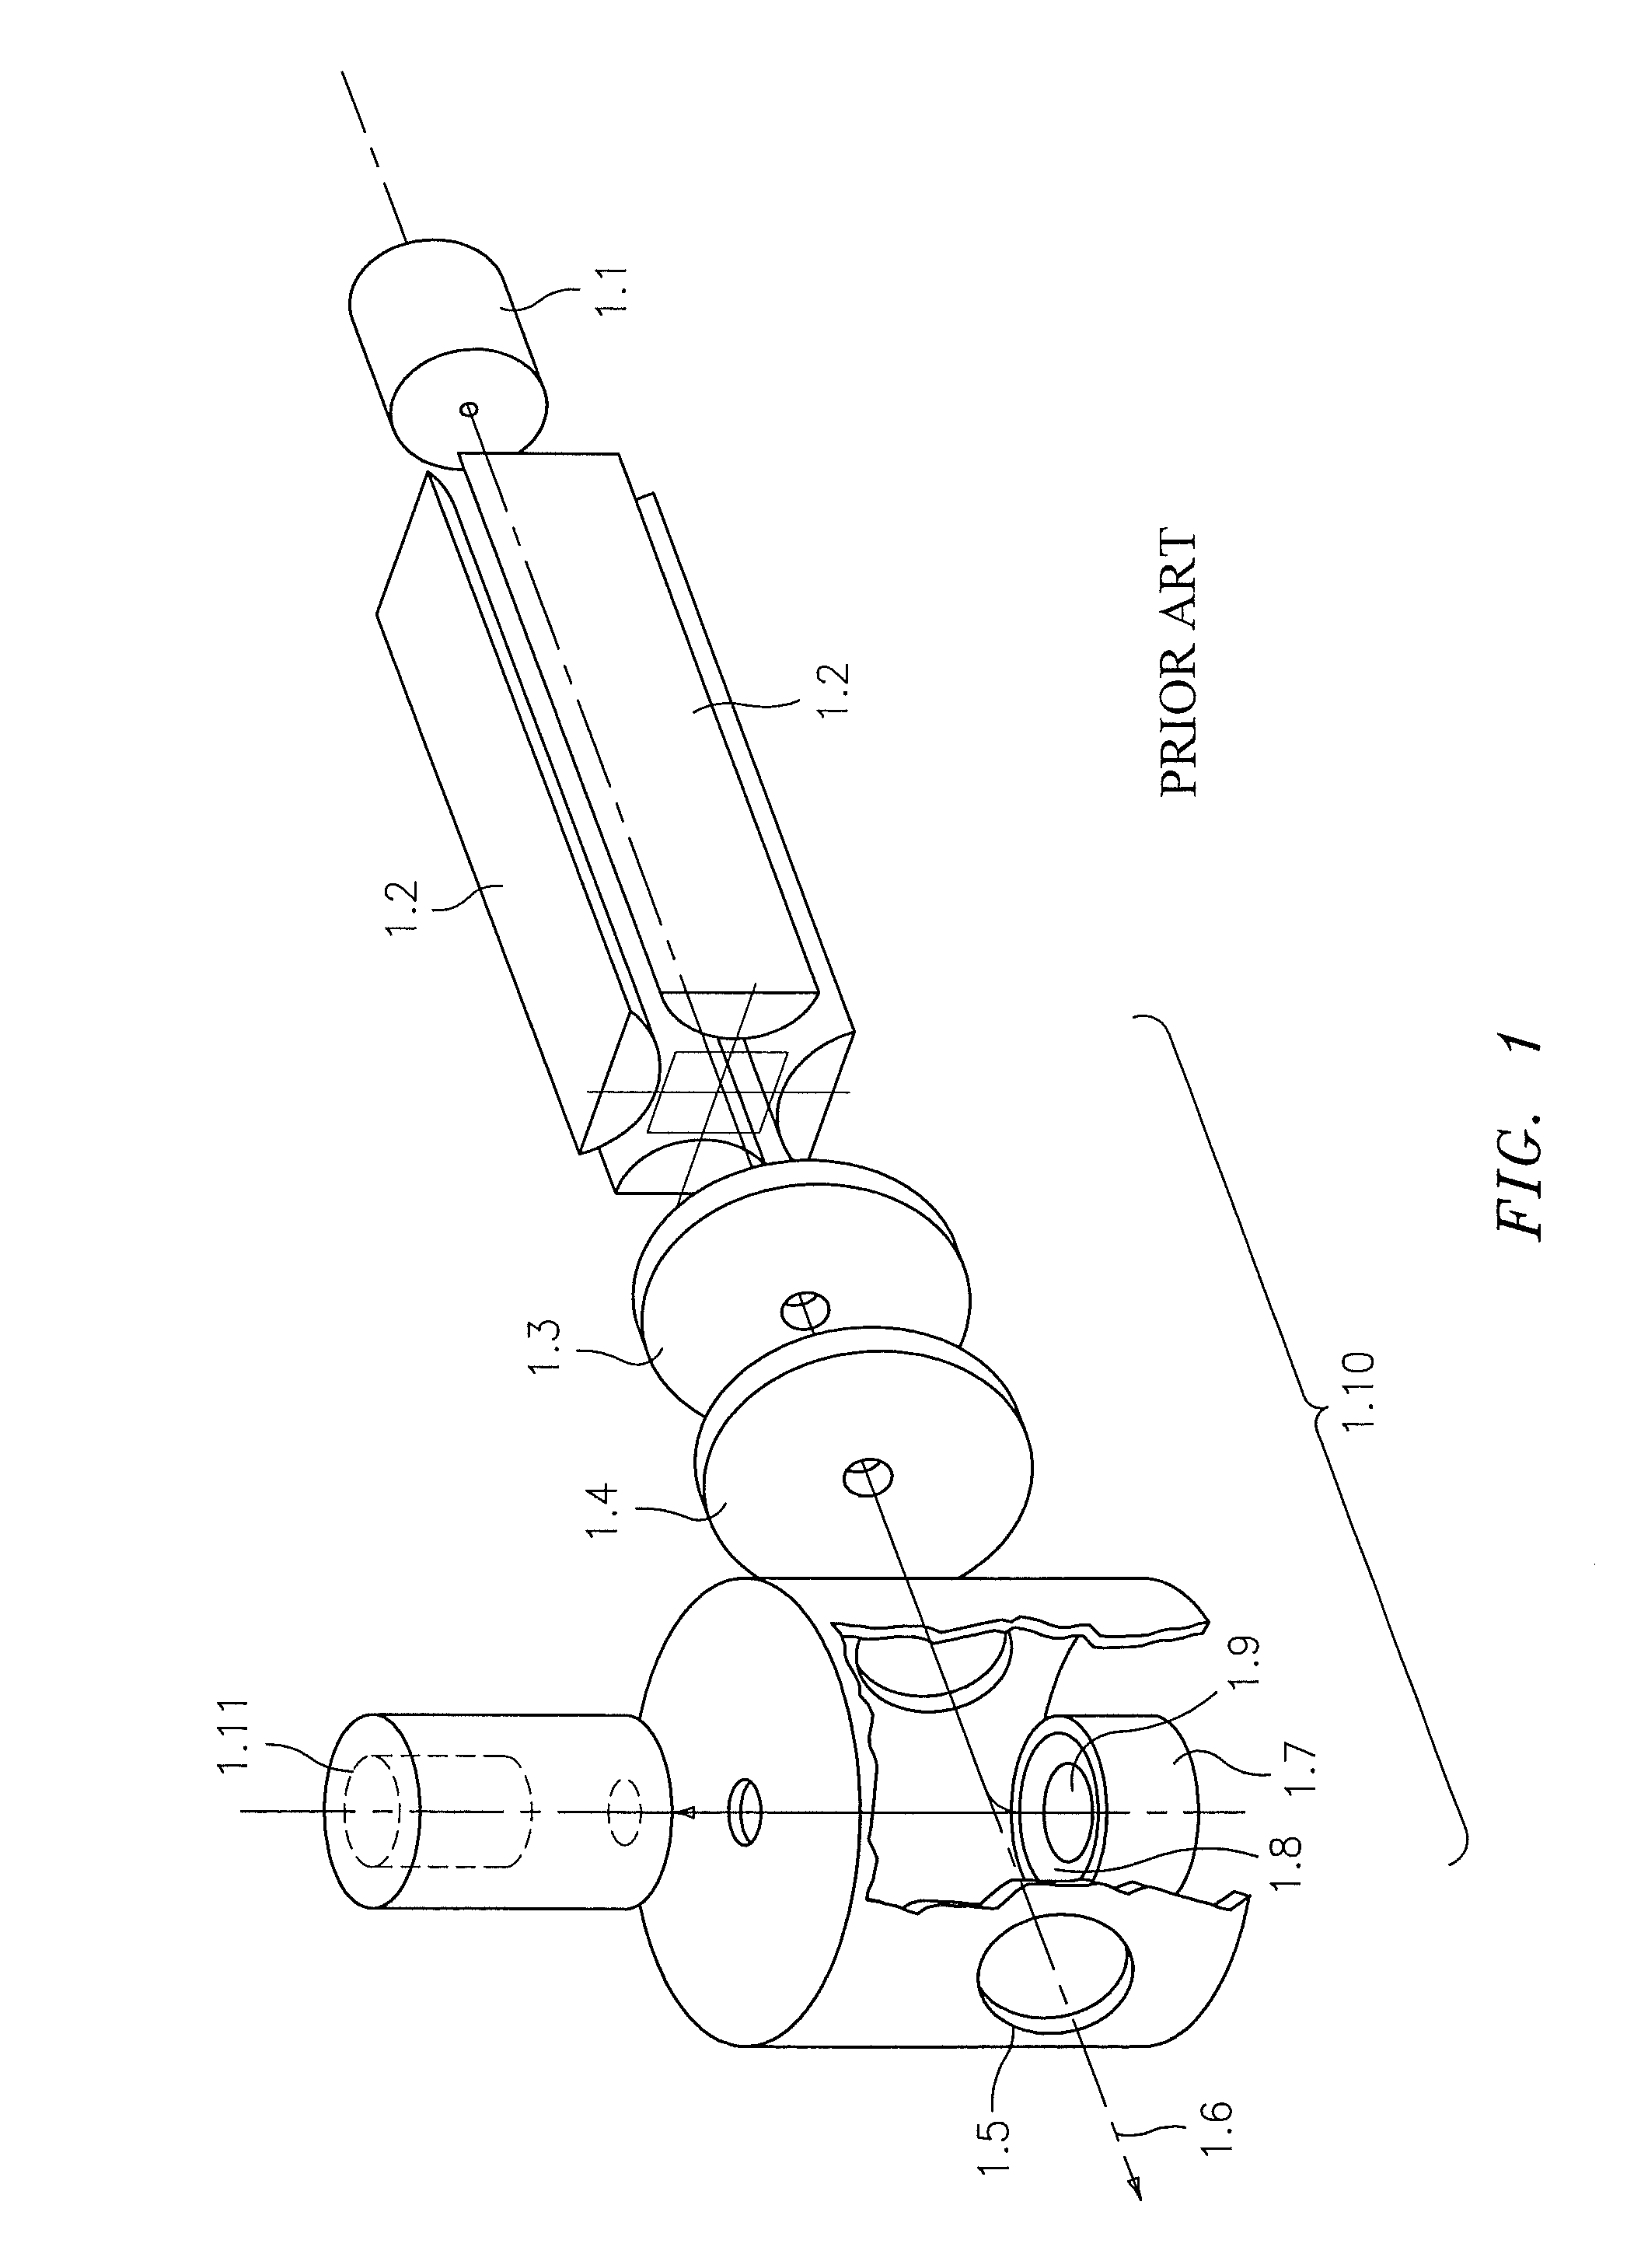 Ion detection system with neutral noise suppression